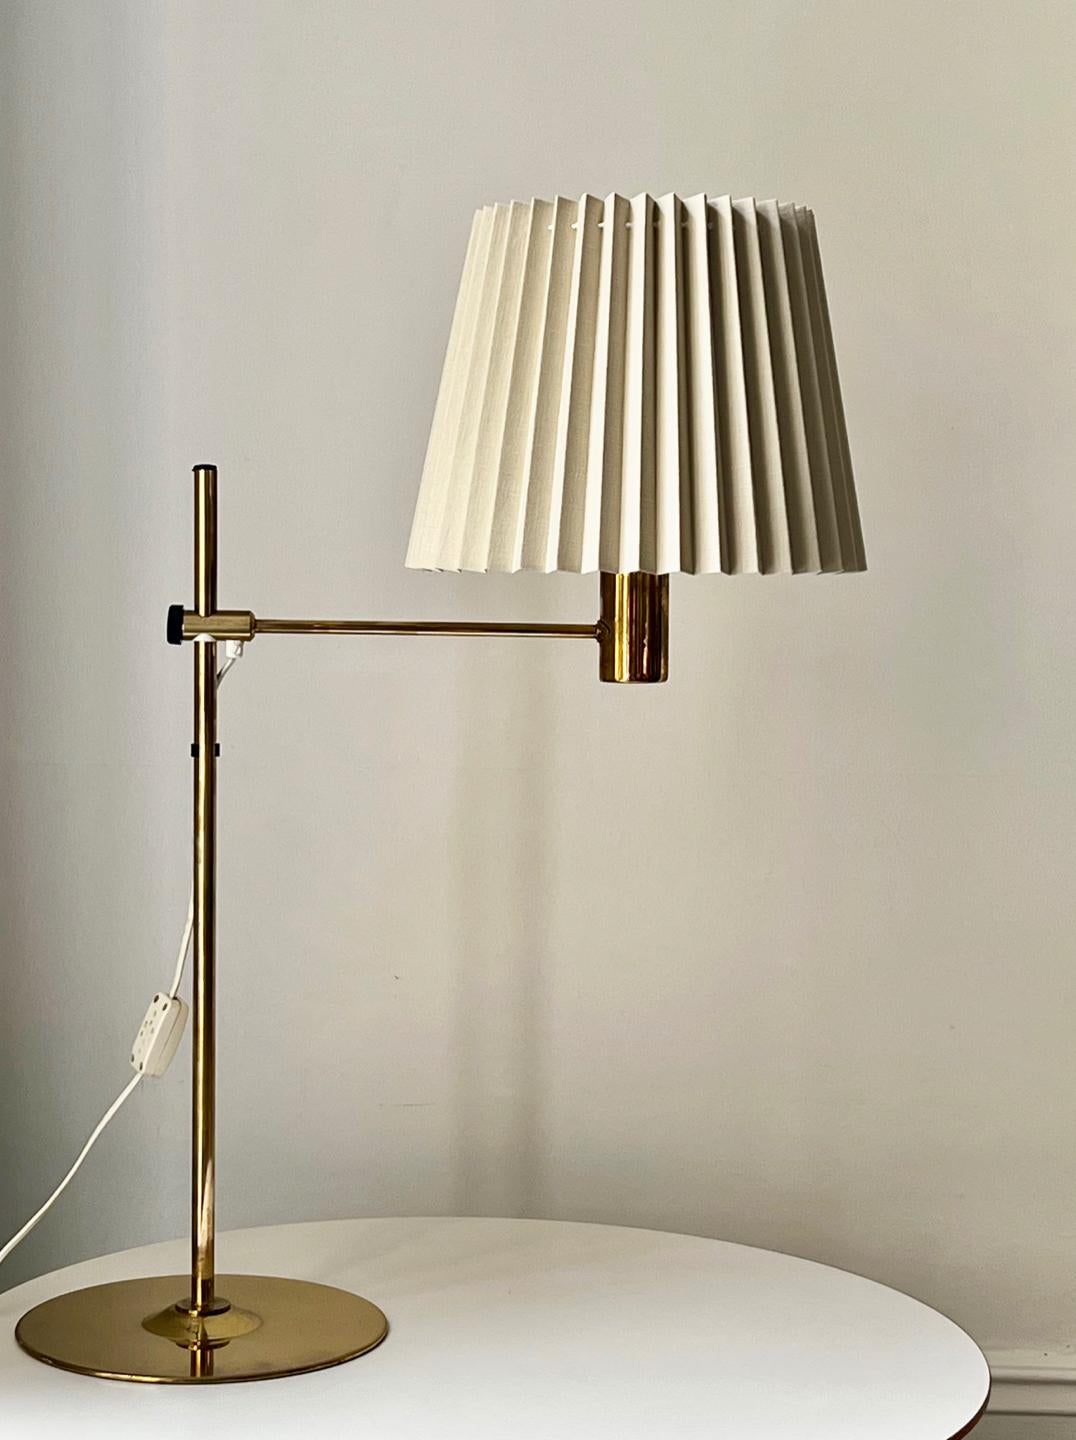 A good sized table lamp in brass by Hans Agne Jakobsson, and made by his company in Markaryd, Sweden, mid-20th century. Labelled to the base.

A simple design with a height-adjustable brass arm and a good weighted base. The brass is in good vintage